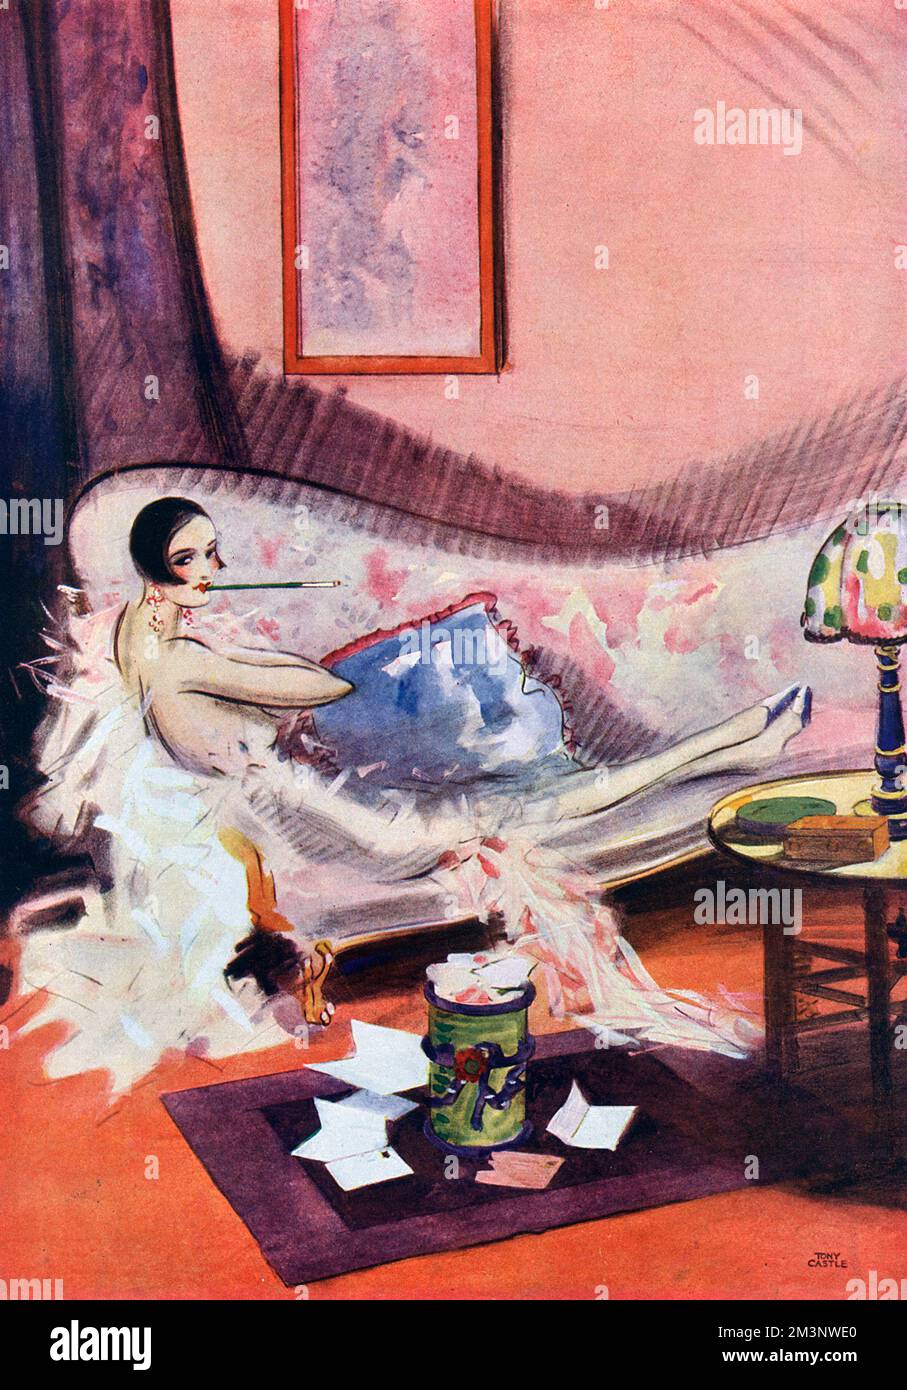 An aloof and fashionable young woman reclines on a chaise longue, with a cigarette holder in her mouth, as a number of opened letters, presumably professing love for her, are littered around a bin on the floor.     Date: 1927 Stock Photo